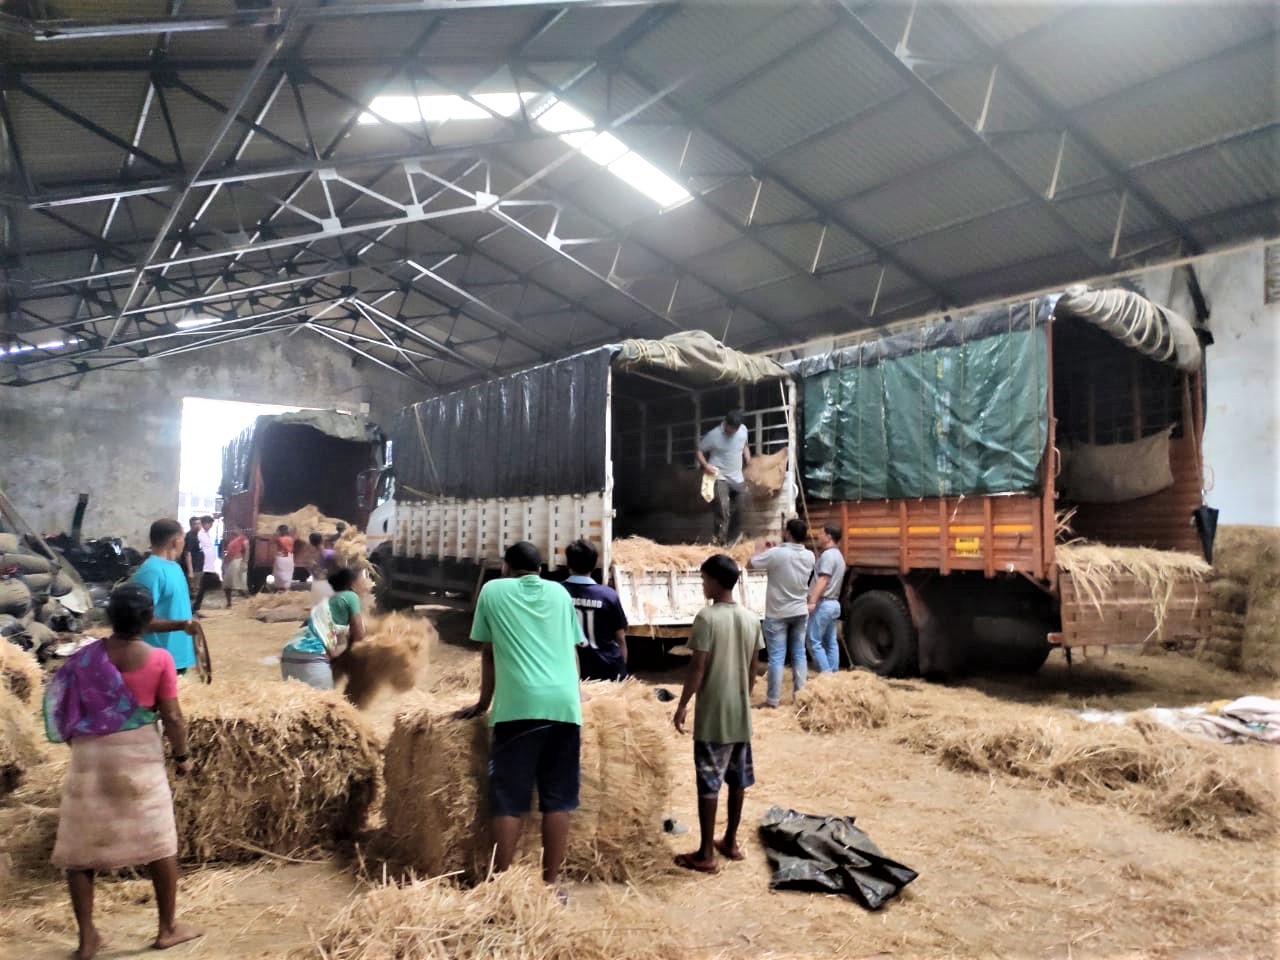 The rescue team and volunteers stand among piles of straw as they fill some of the trucks that will transport the rescued horses to the sanctuary.